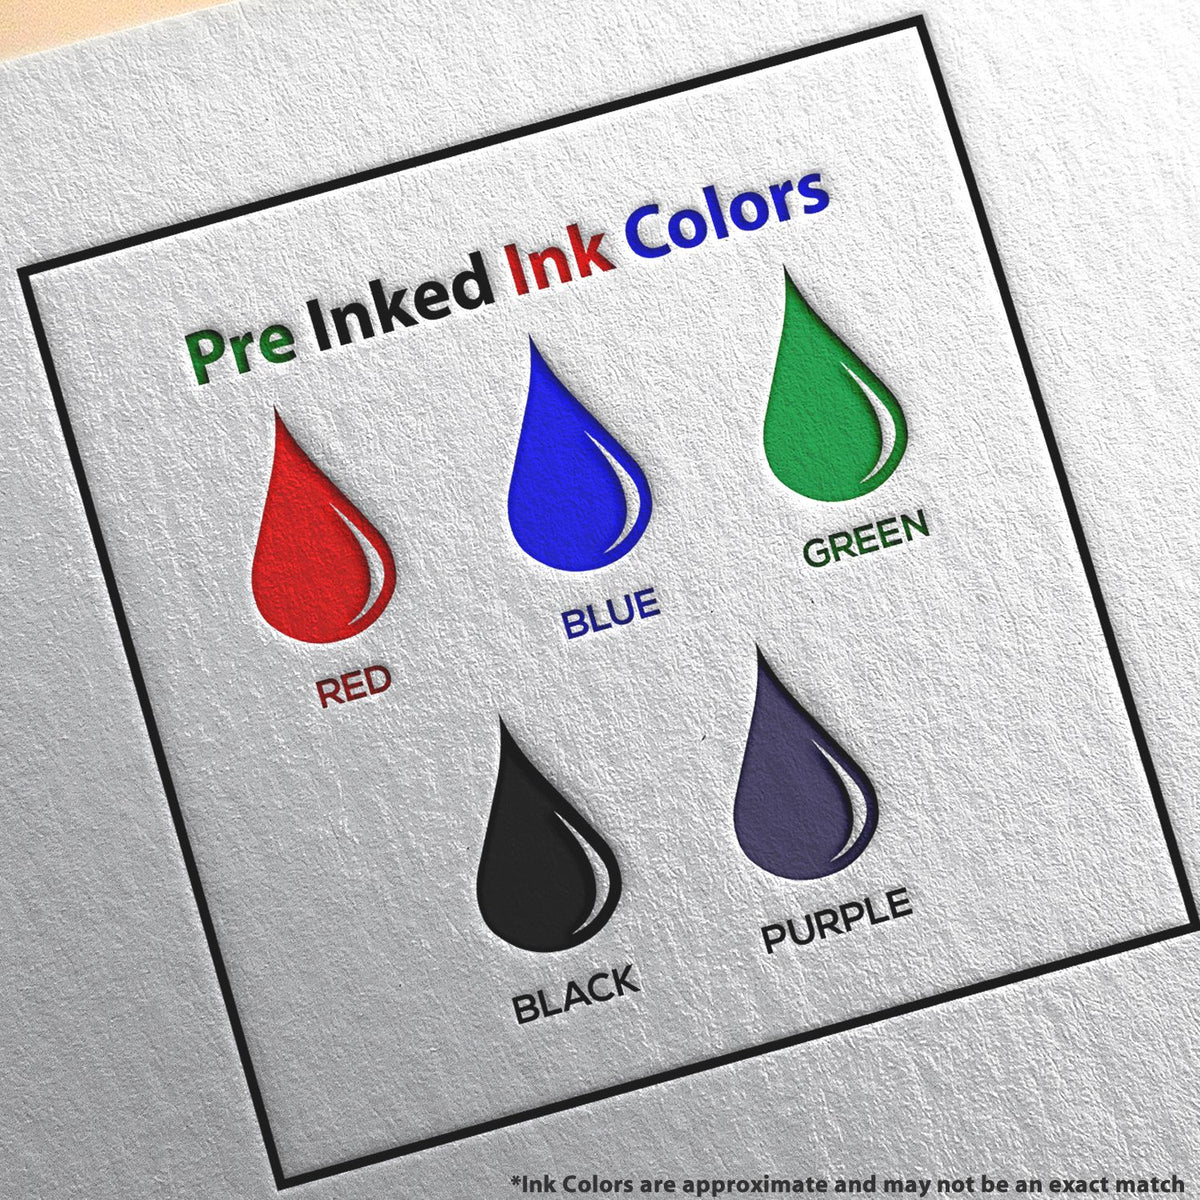 A picture showing the different ink colors or hues available for the Slim Pre-Inked Vermont Architect Seal Stamp product.